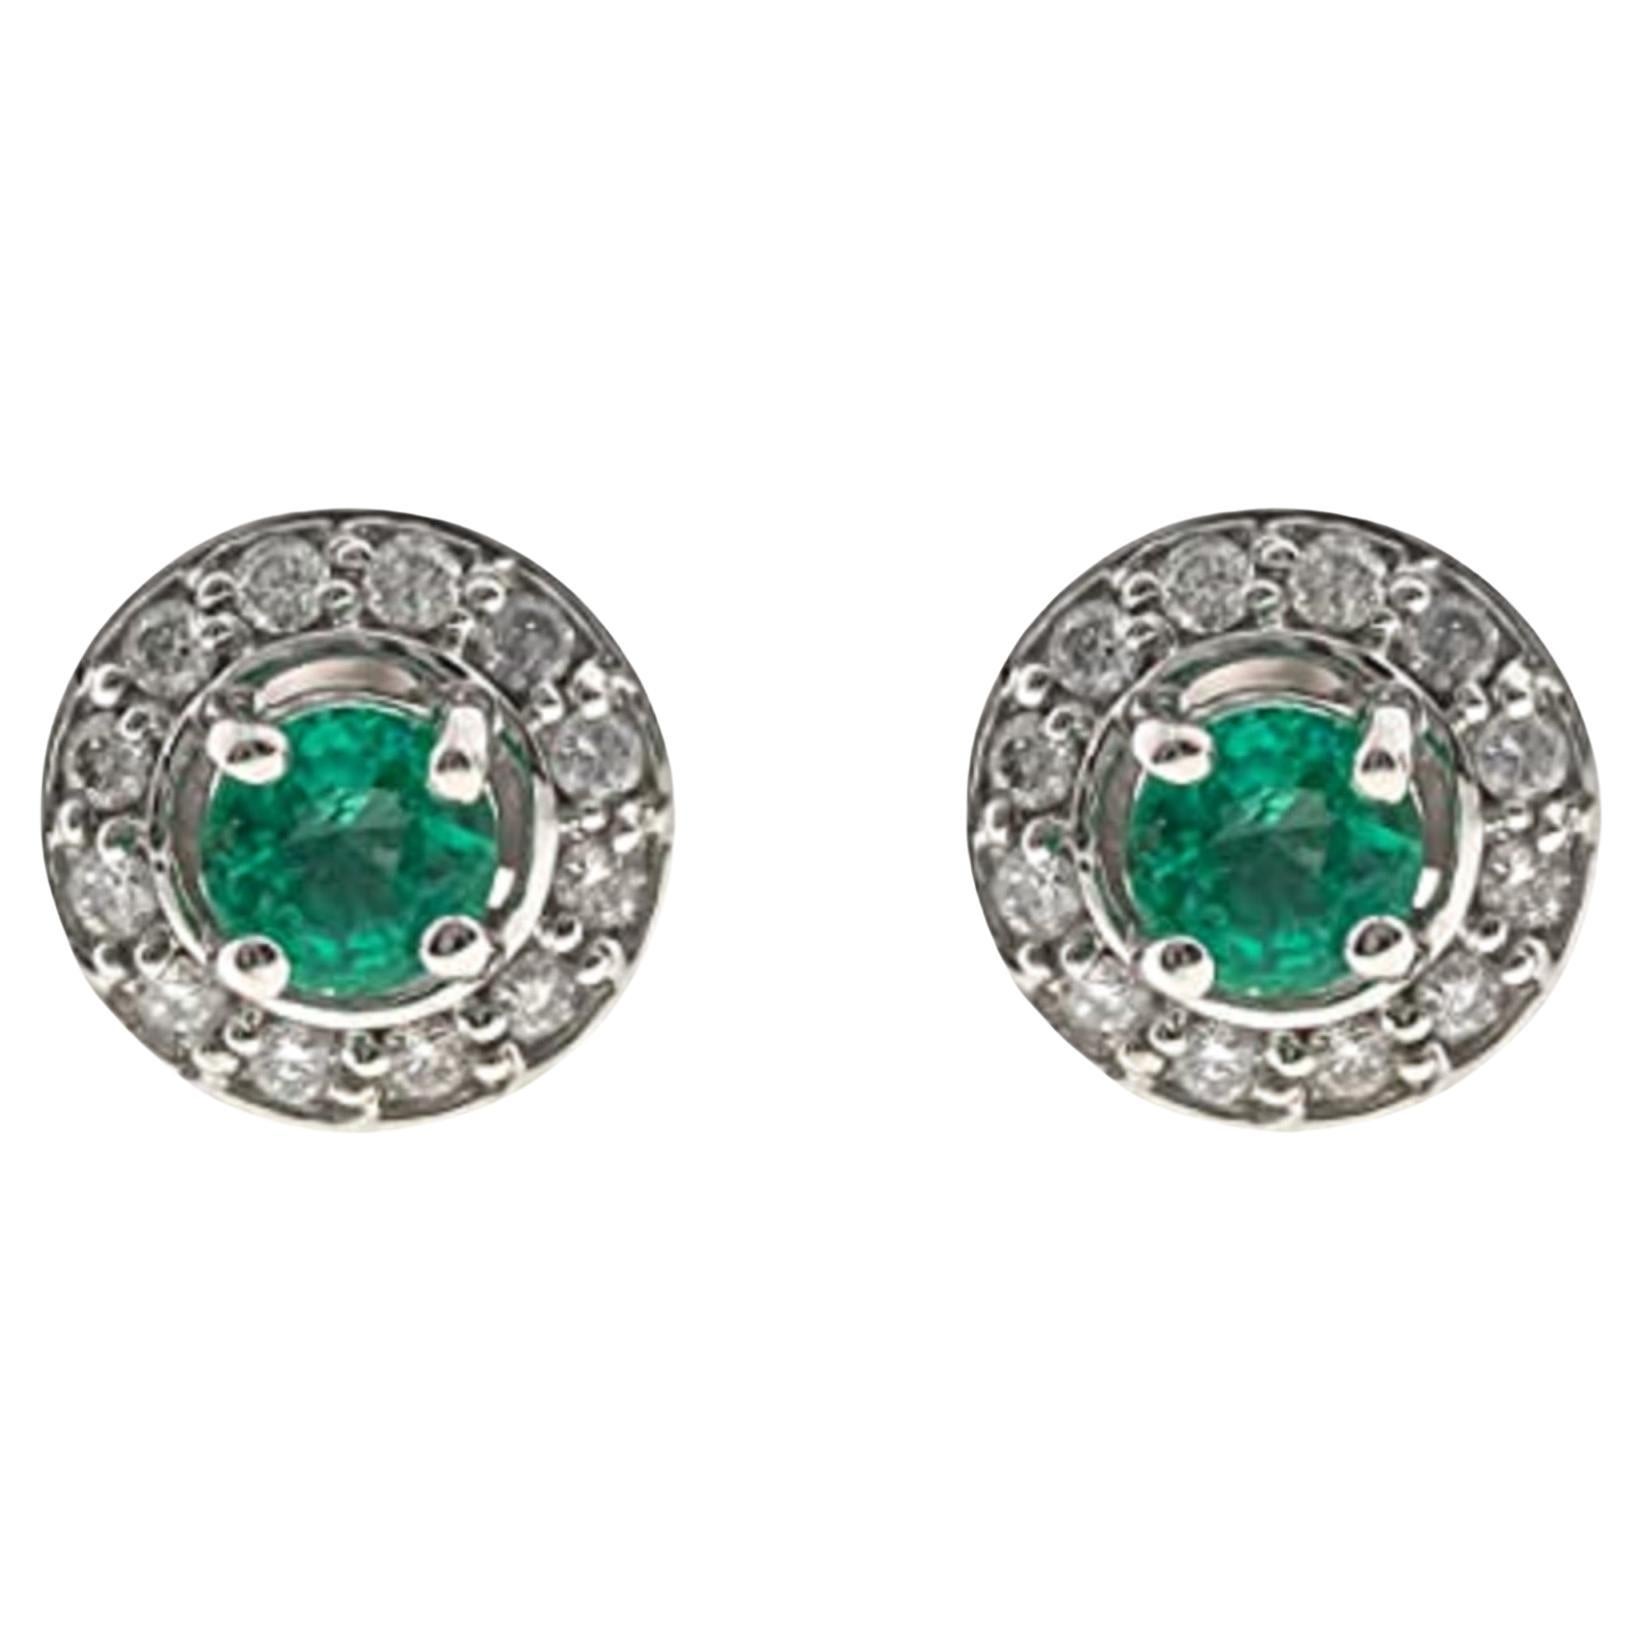 Gin & Grace 10K White Gold Natural Zambian Emerald Stud Earrings with Diamond For Sale